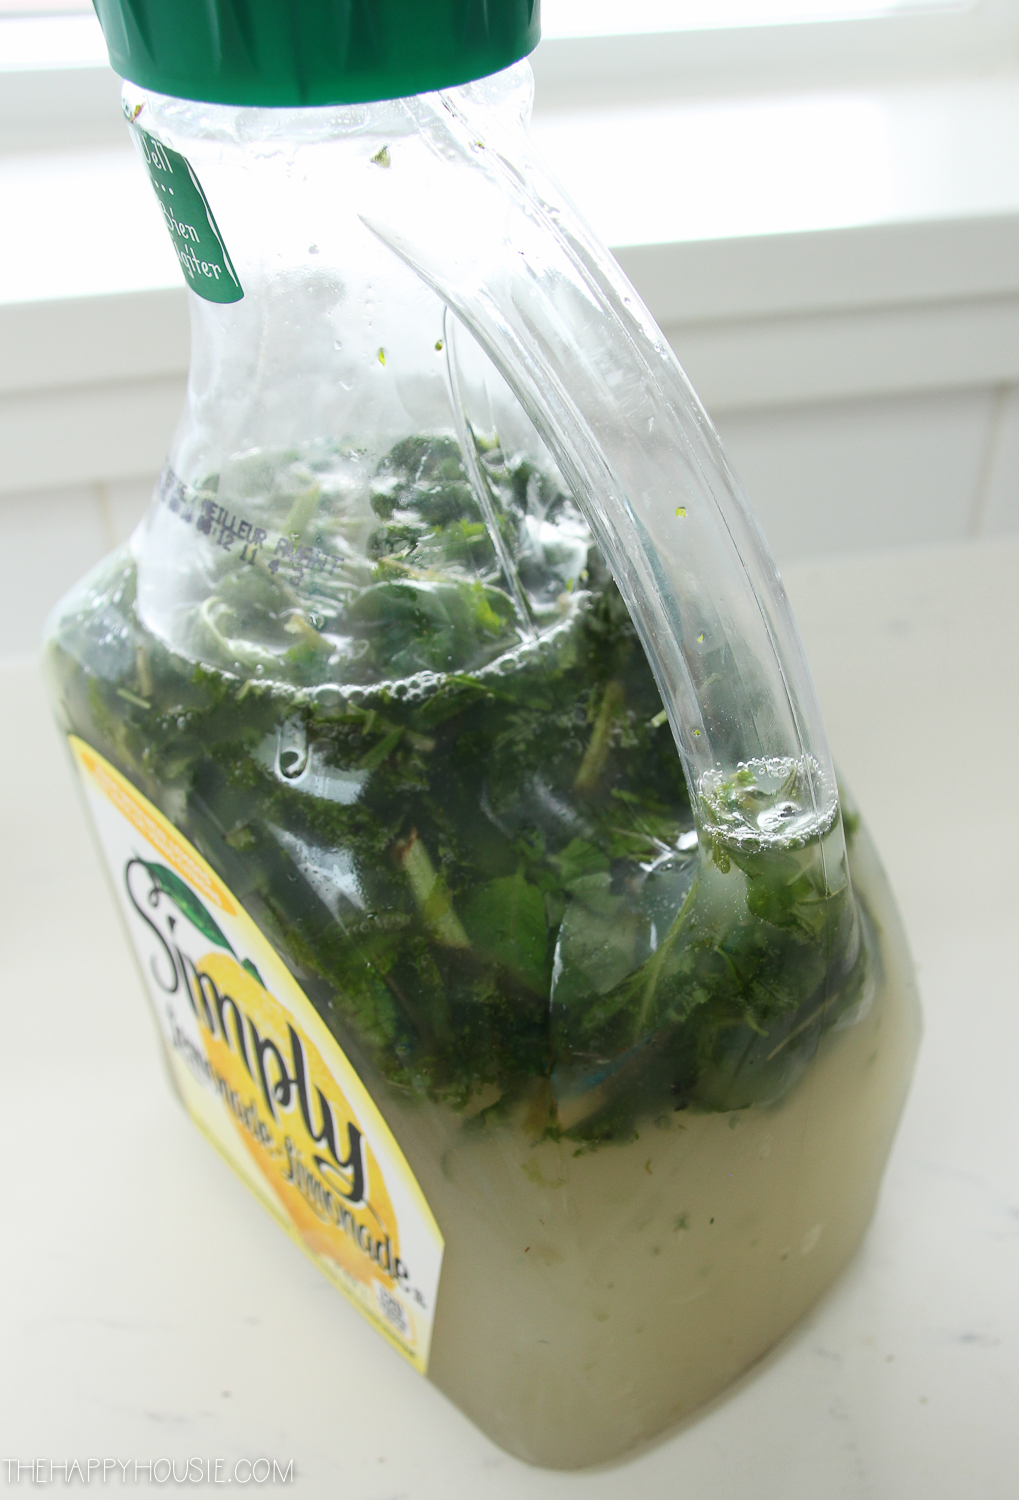 Putting the herbs into the lemonade container.